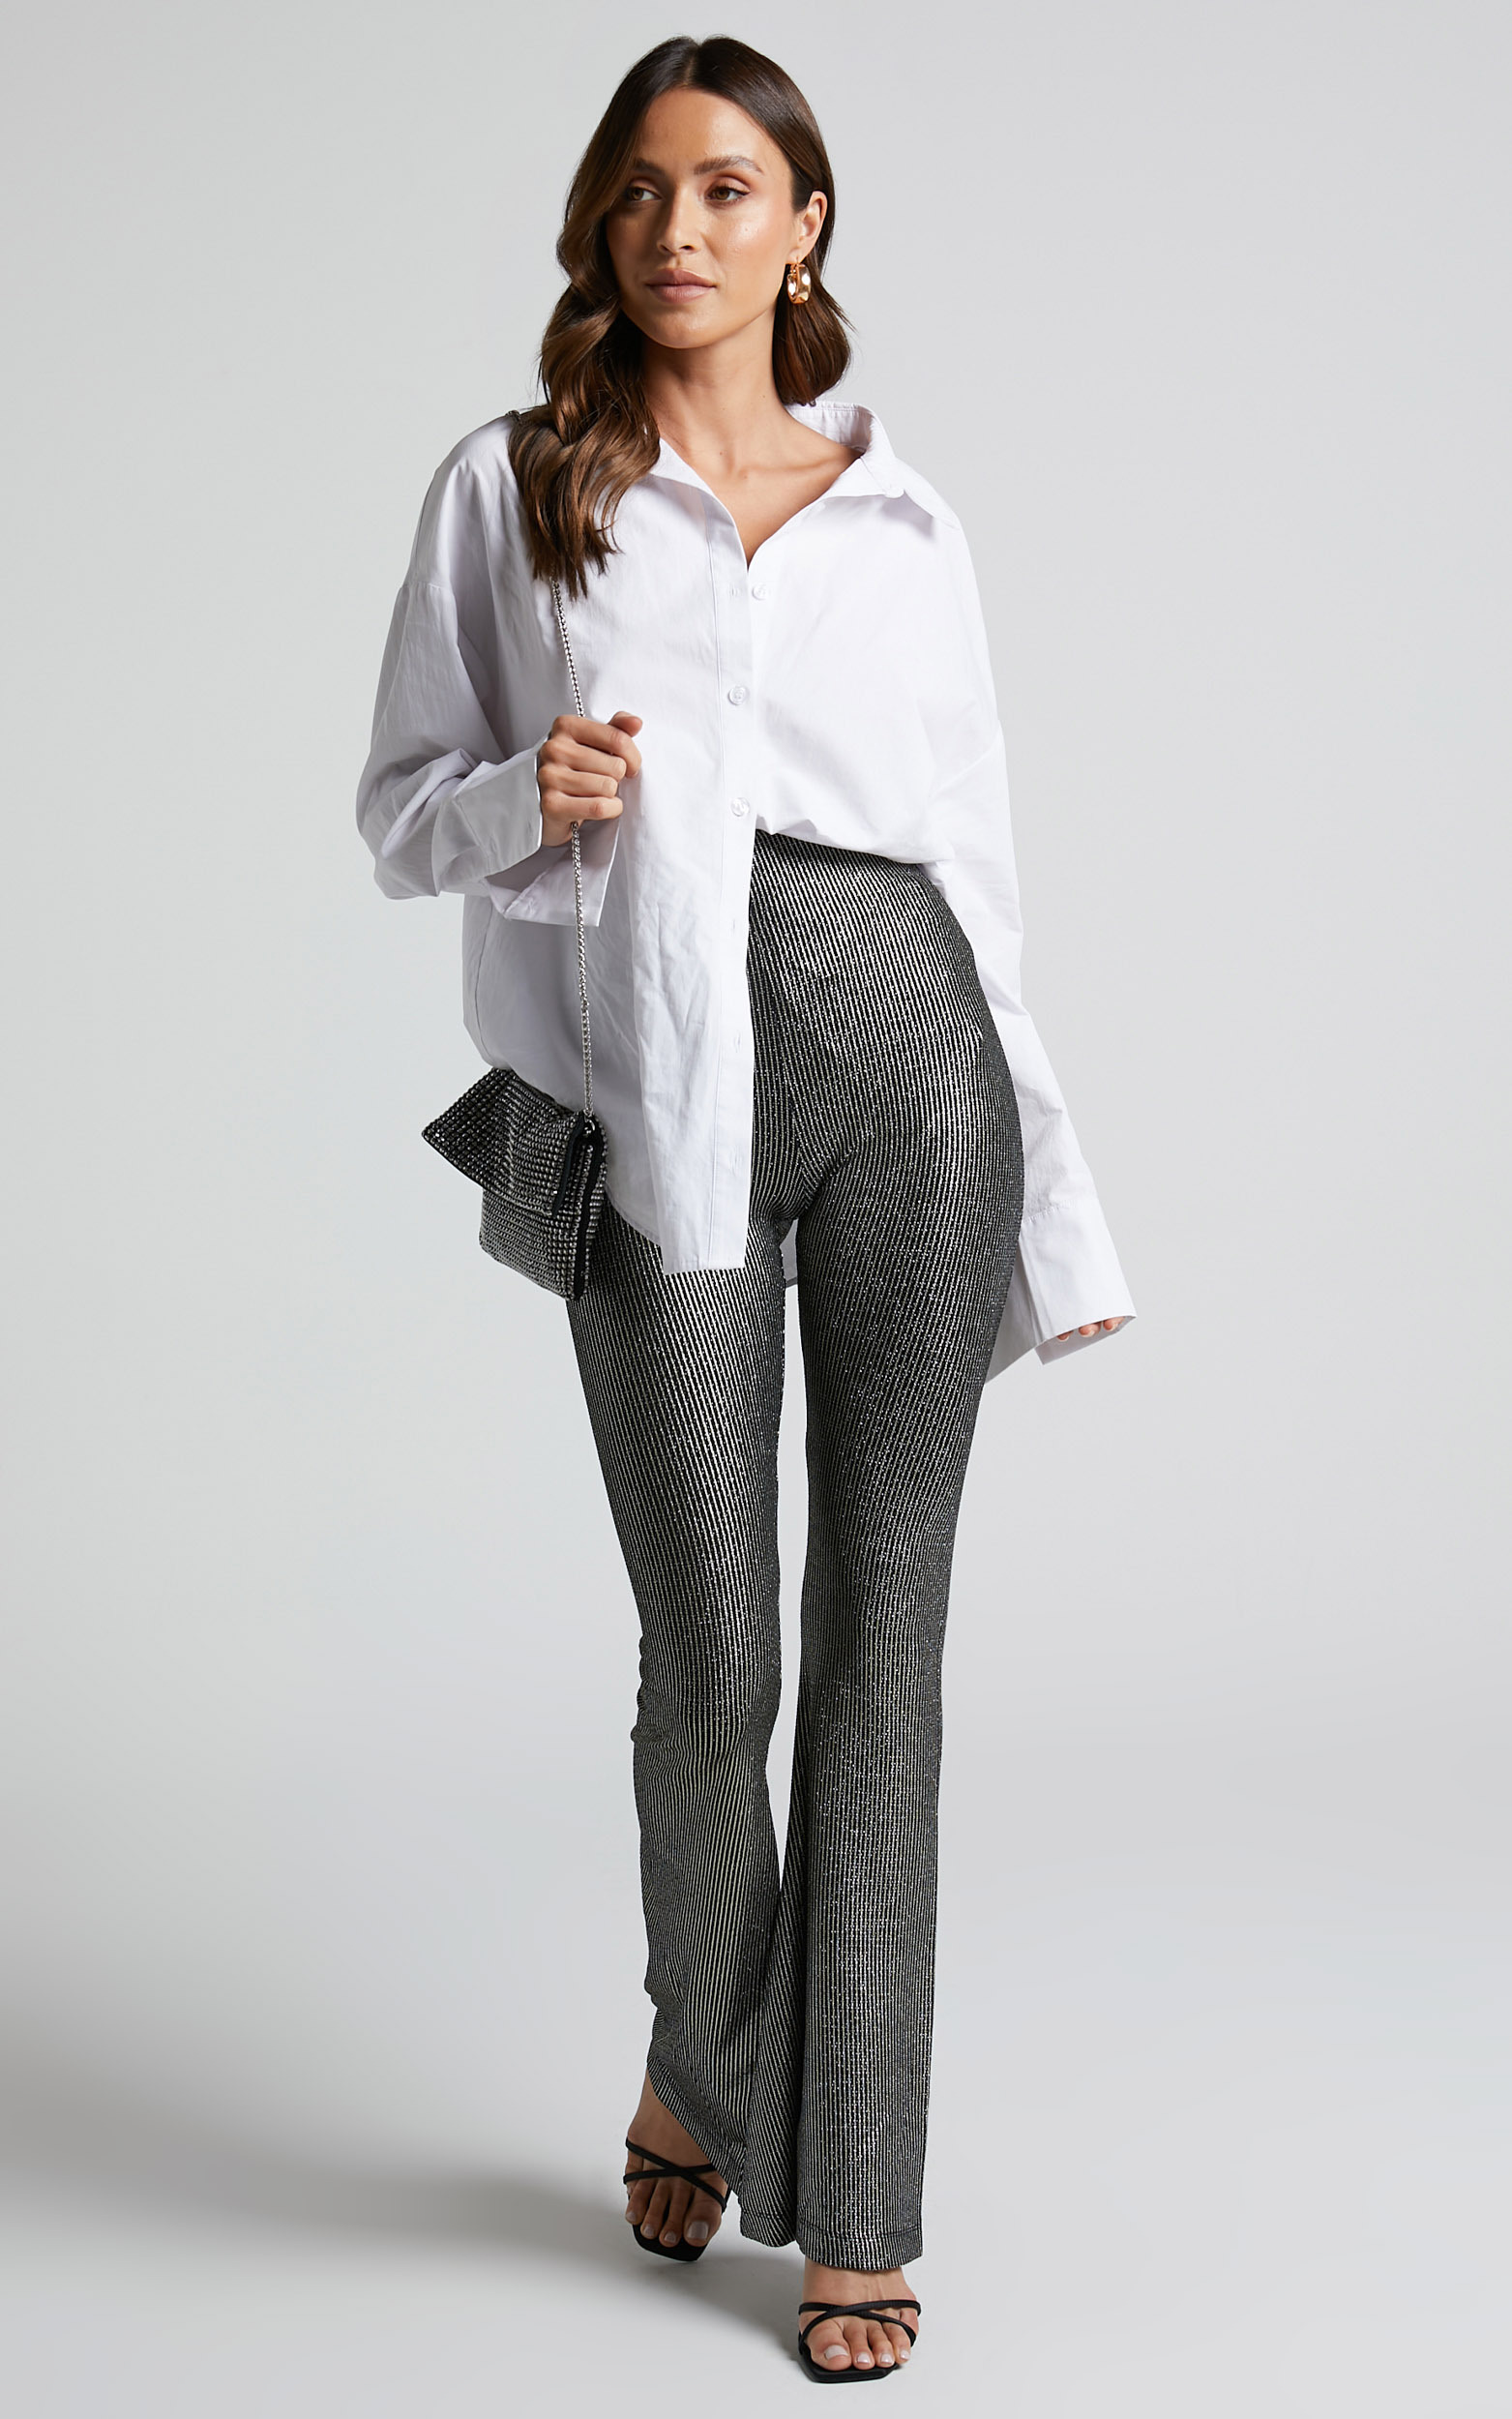 Merlin Lurex Flared Pants in Black and Silver - 04, BLK1, hi-res image number null